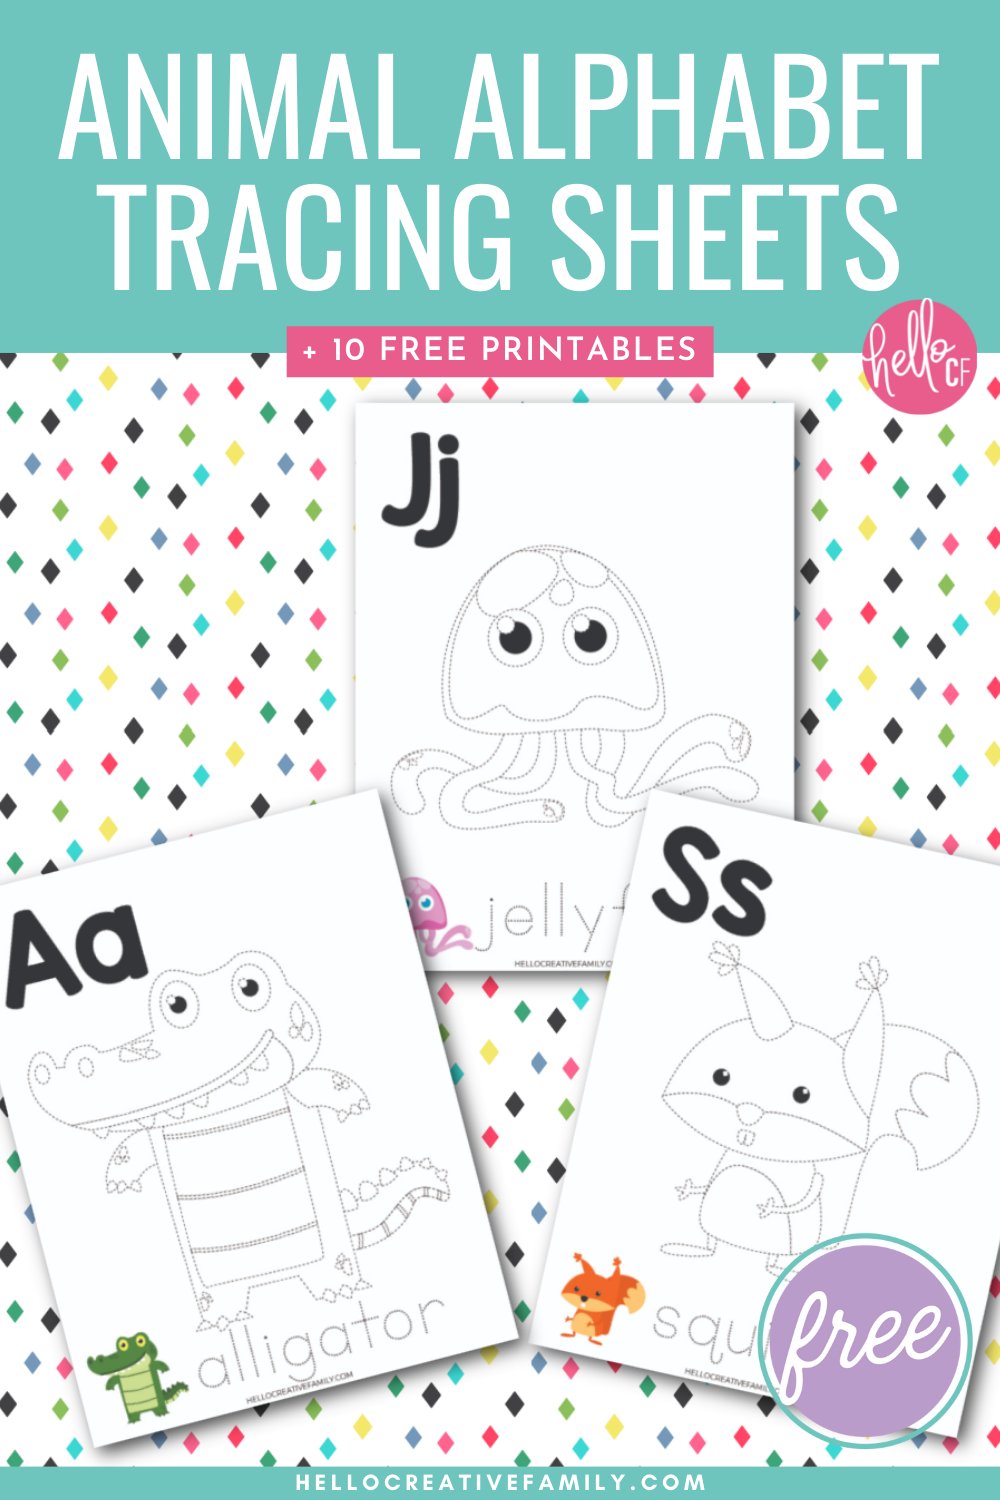 Grab your crayons and pencils! We're sharing 10 free alphabet printables including animal ABC tracing worksheets that kids can use to color and practice their letters! Perfect for preschool, elementary school, daycare and homeschooling! Other printables include alphabet bingo, alphabet scavenger hunt and alphabet coloring sheets!